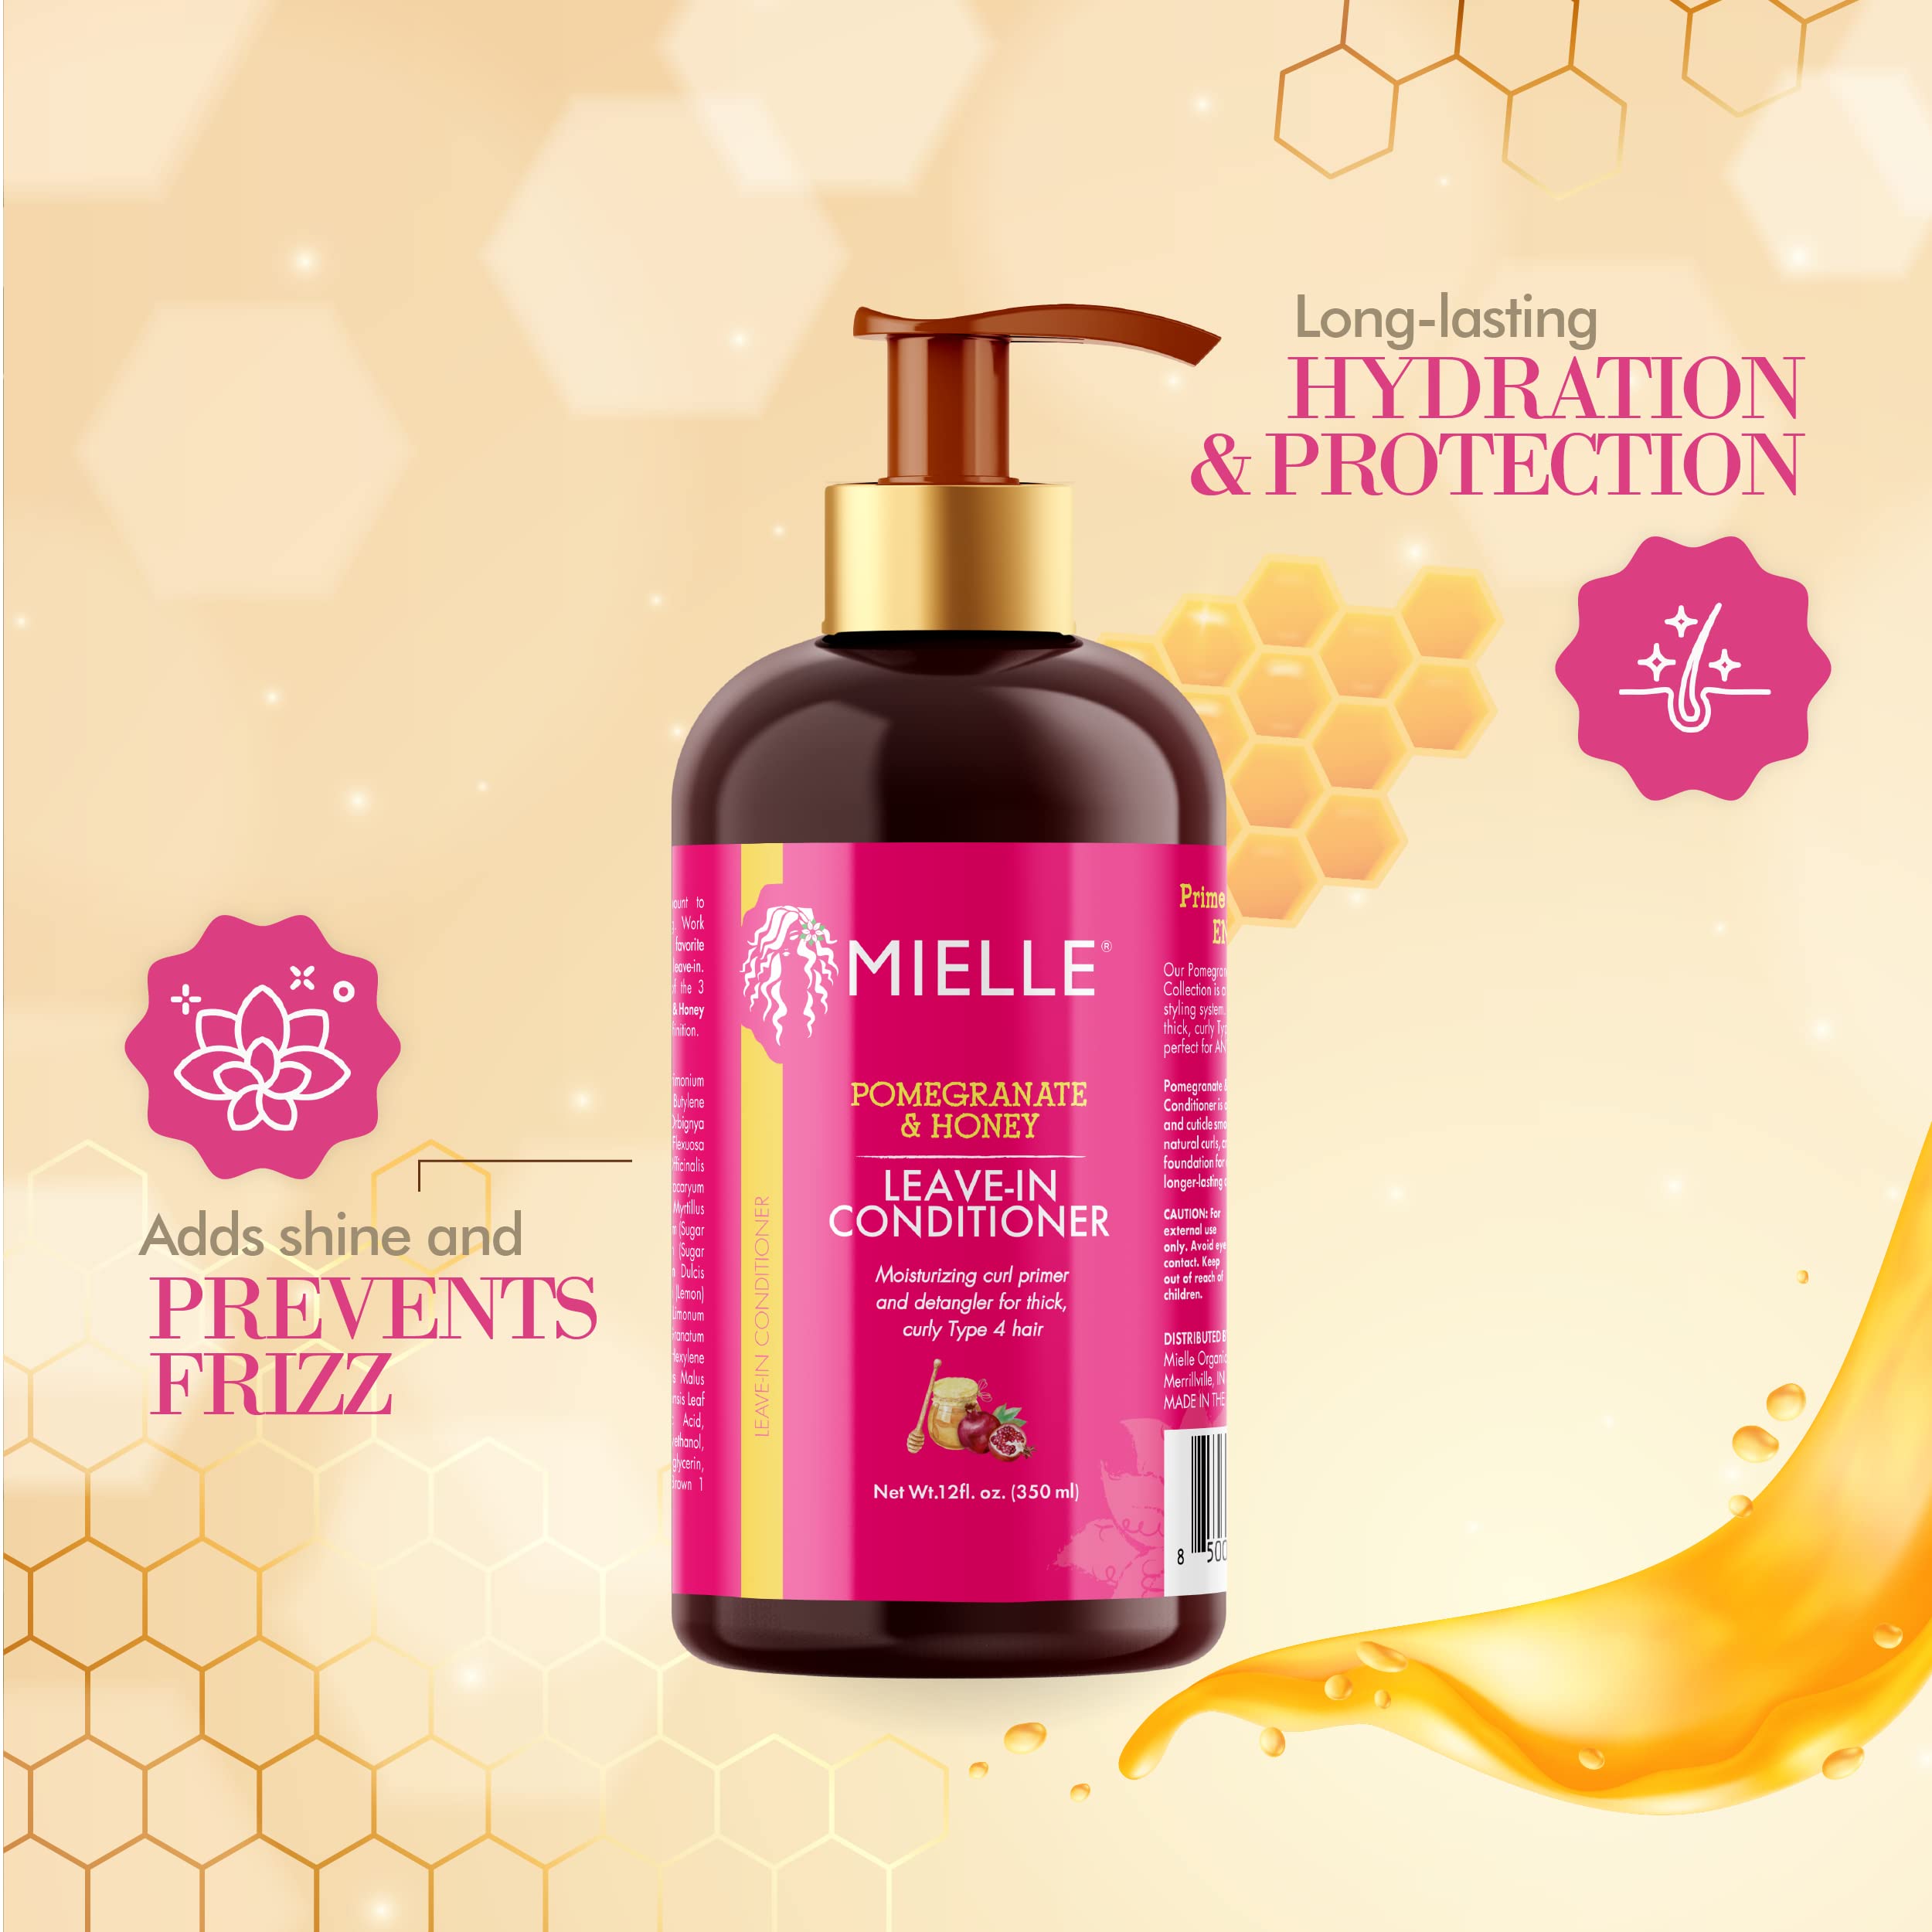 Mielle Organics Pomegranate & Honey Leave-In Conditioner for Type 4 Hair, 12 Ounces